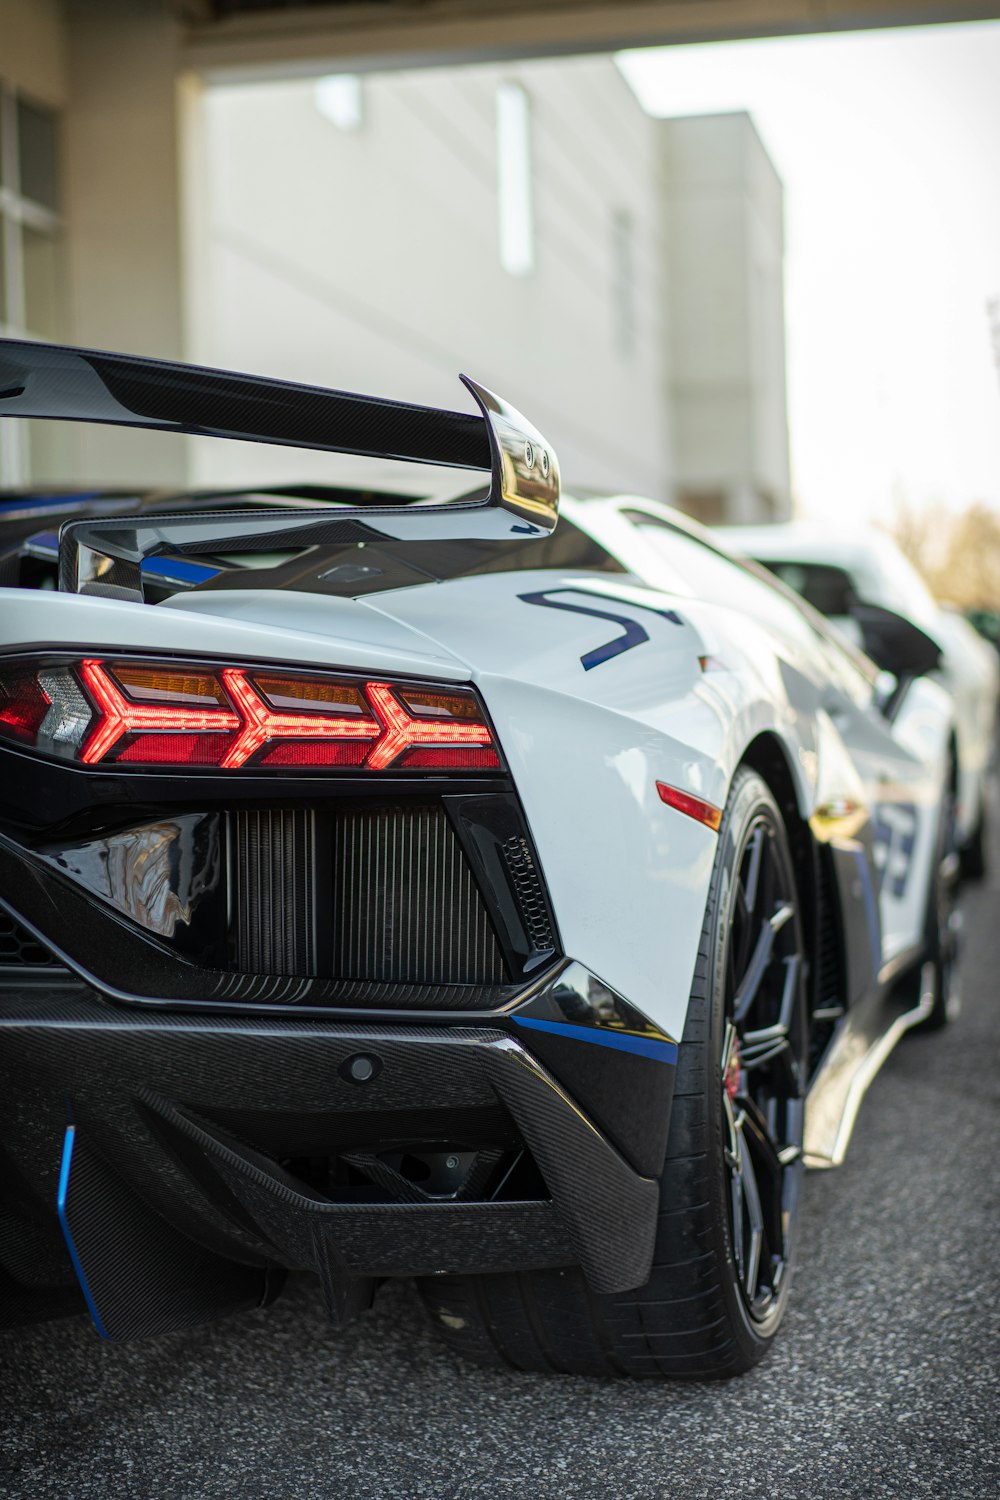 Exotic Car Pictures Download Free Images On Unsplash